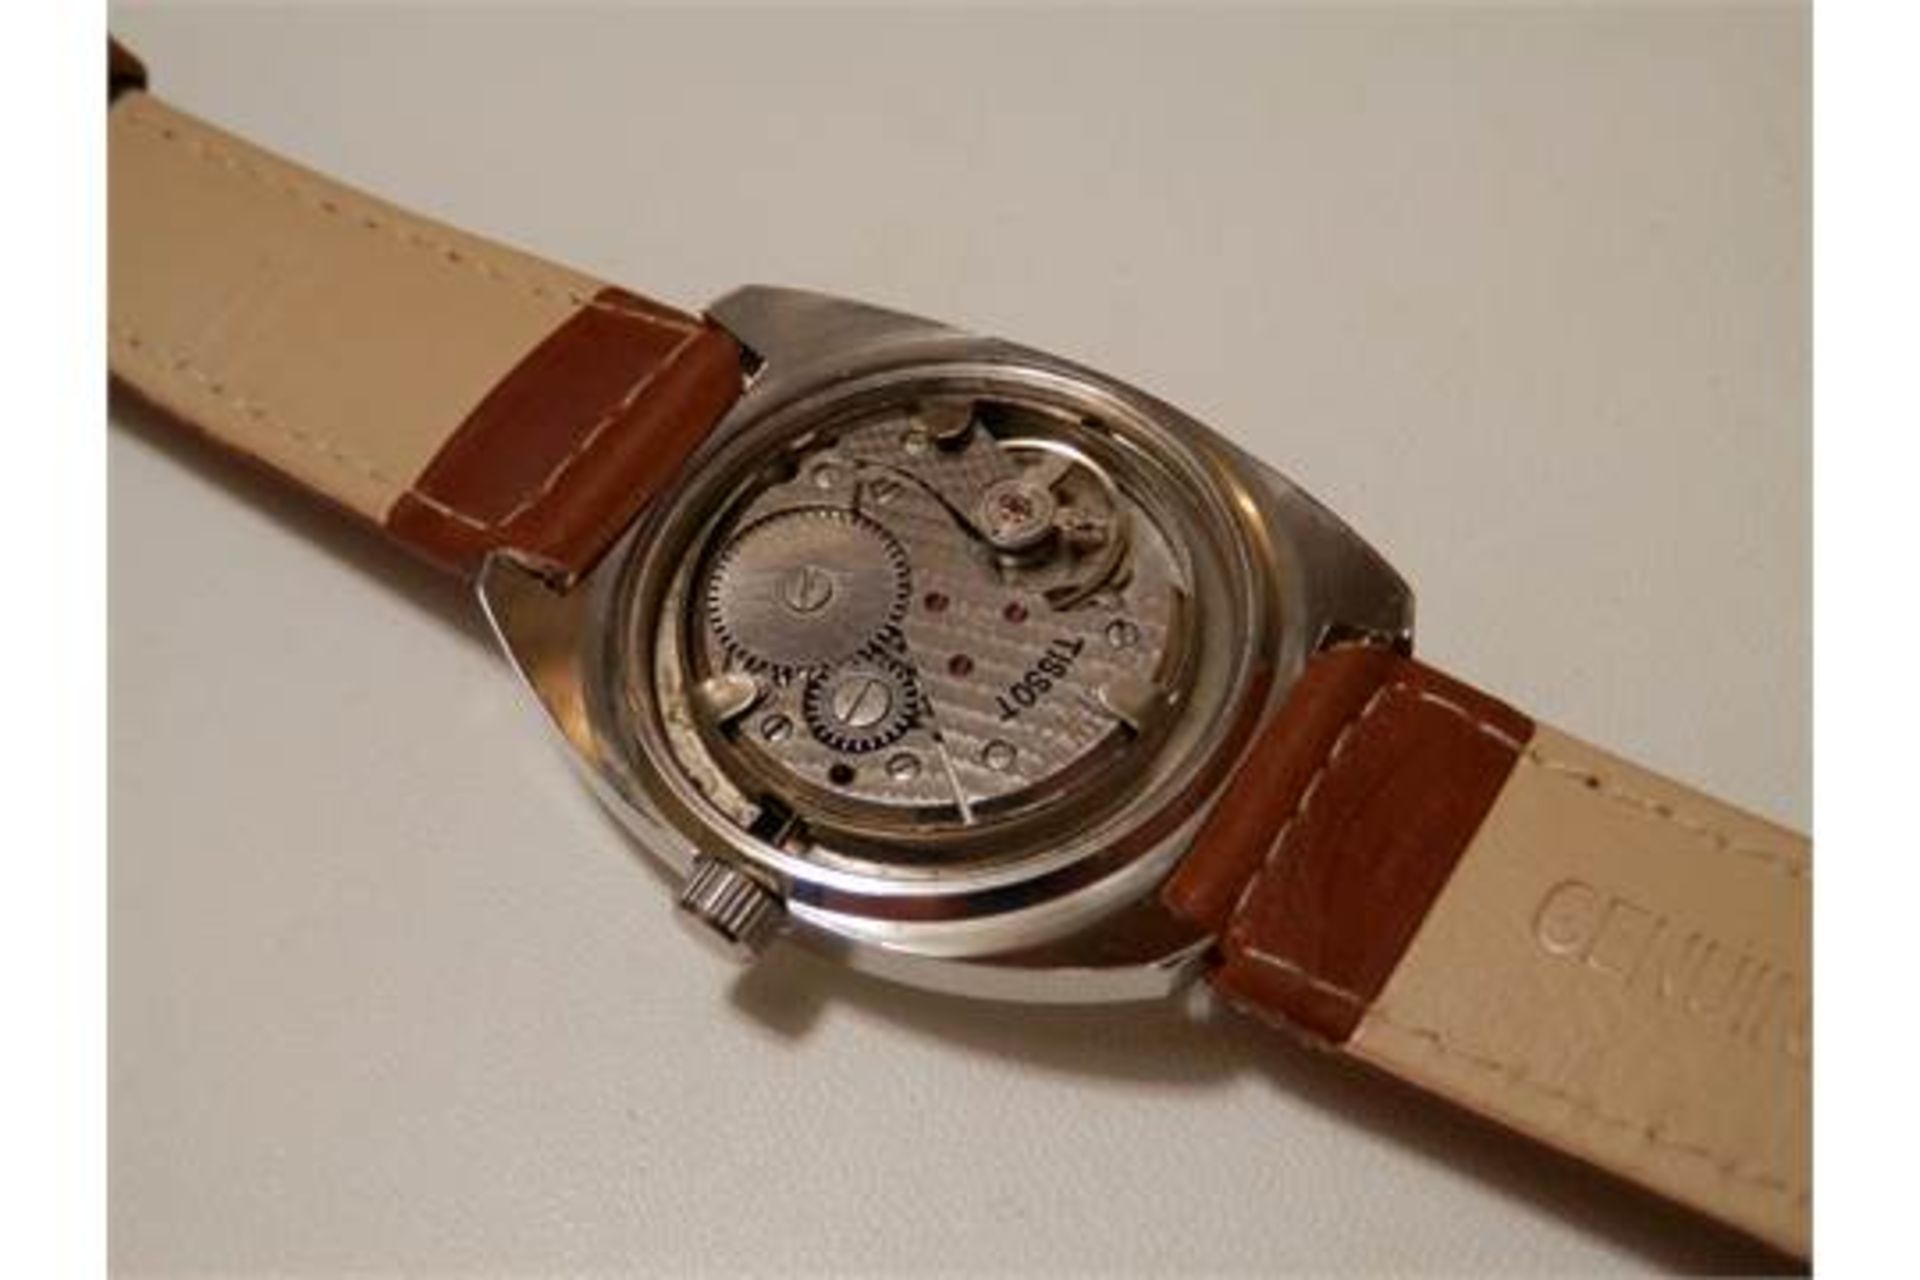 SUPERB GENTS TISSOT SEASTAR, POSSIBLY NEW/OLD STOCK 1970S 17 JEWEL SWISS WATCH (1 of 3 available) - Image 8 of 10